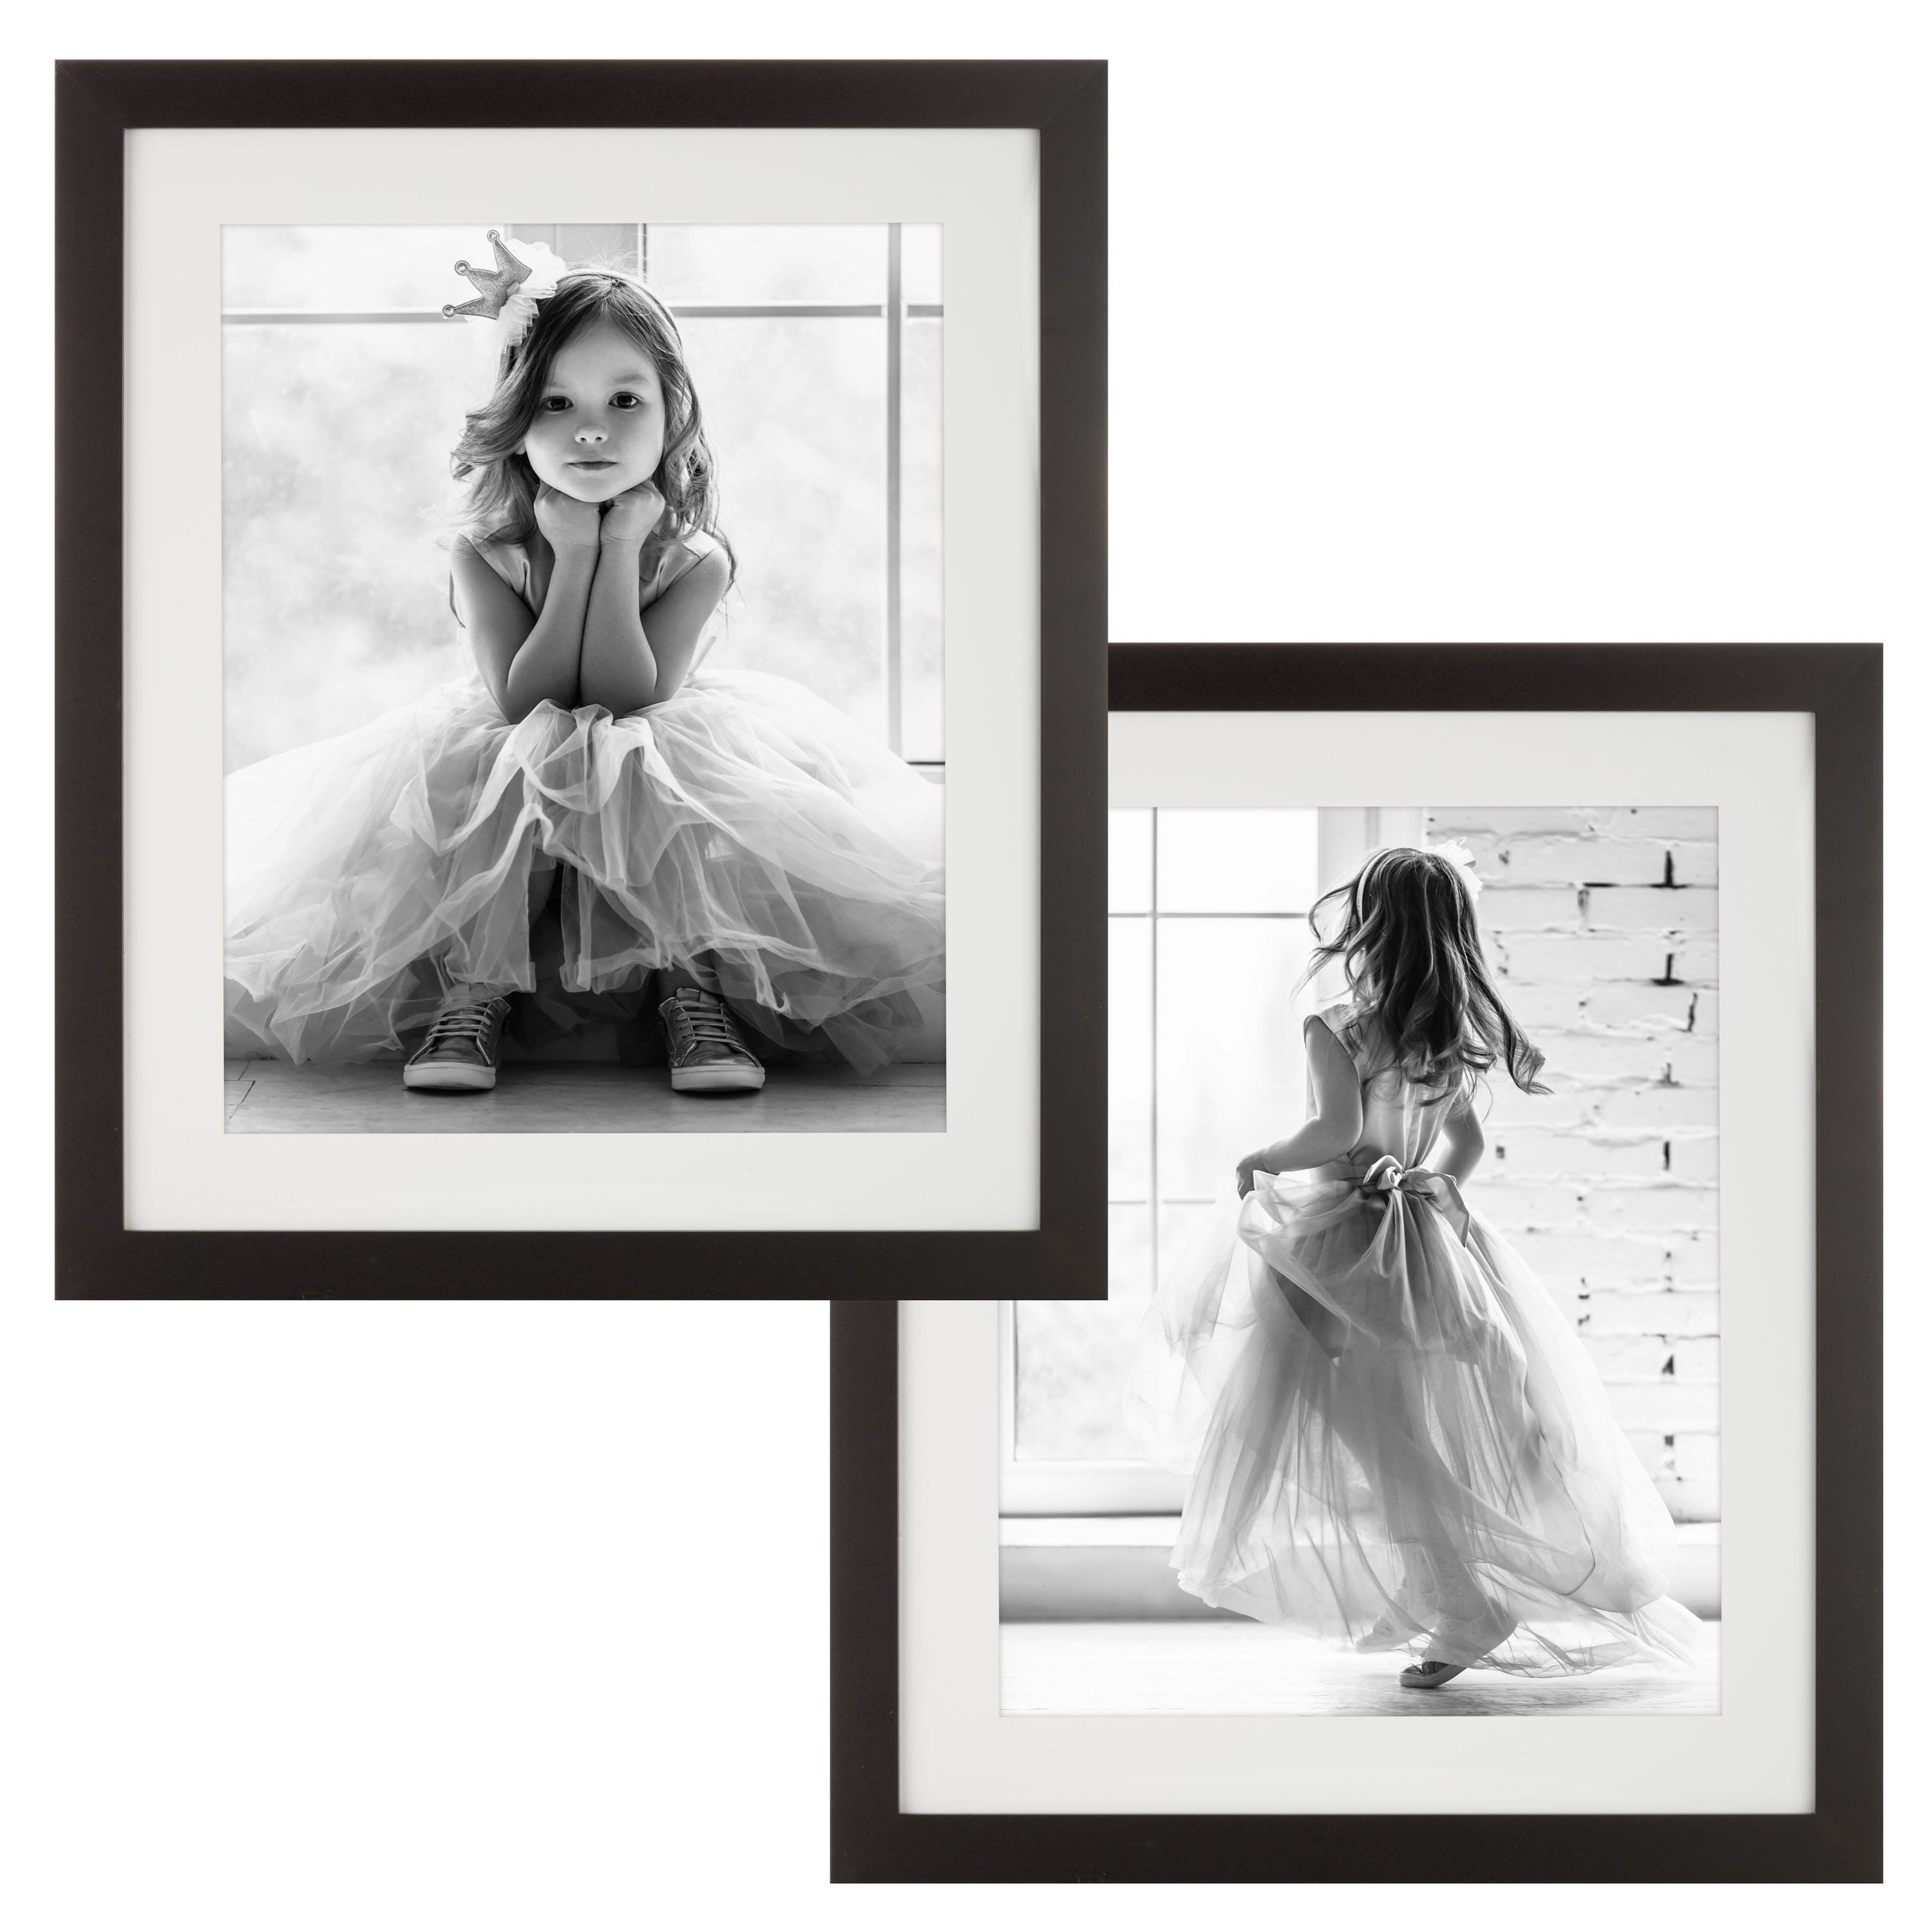 upsimples 16x20 Picture Frame Set of 5, Display Pictures 11x14 with Mat or  16x20 Without Mat, Wall Gallery Poster Frames, Black